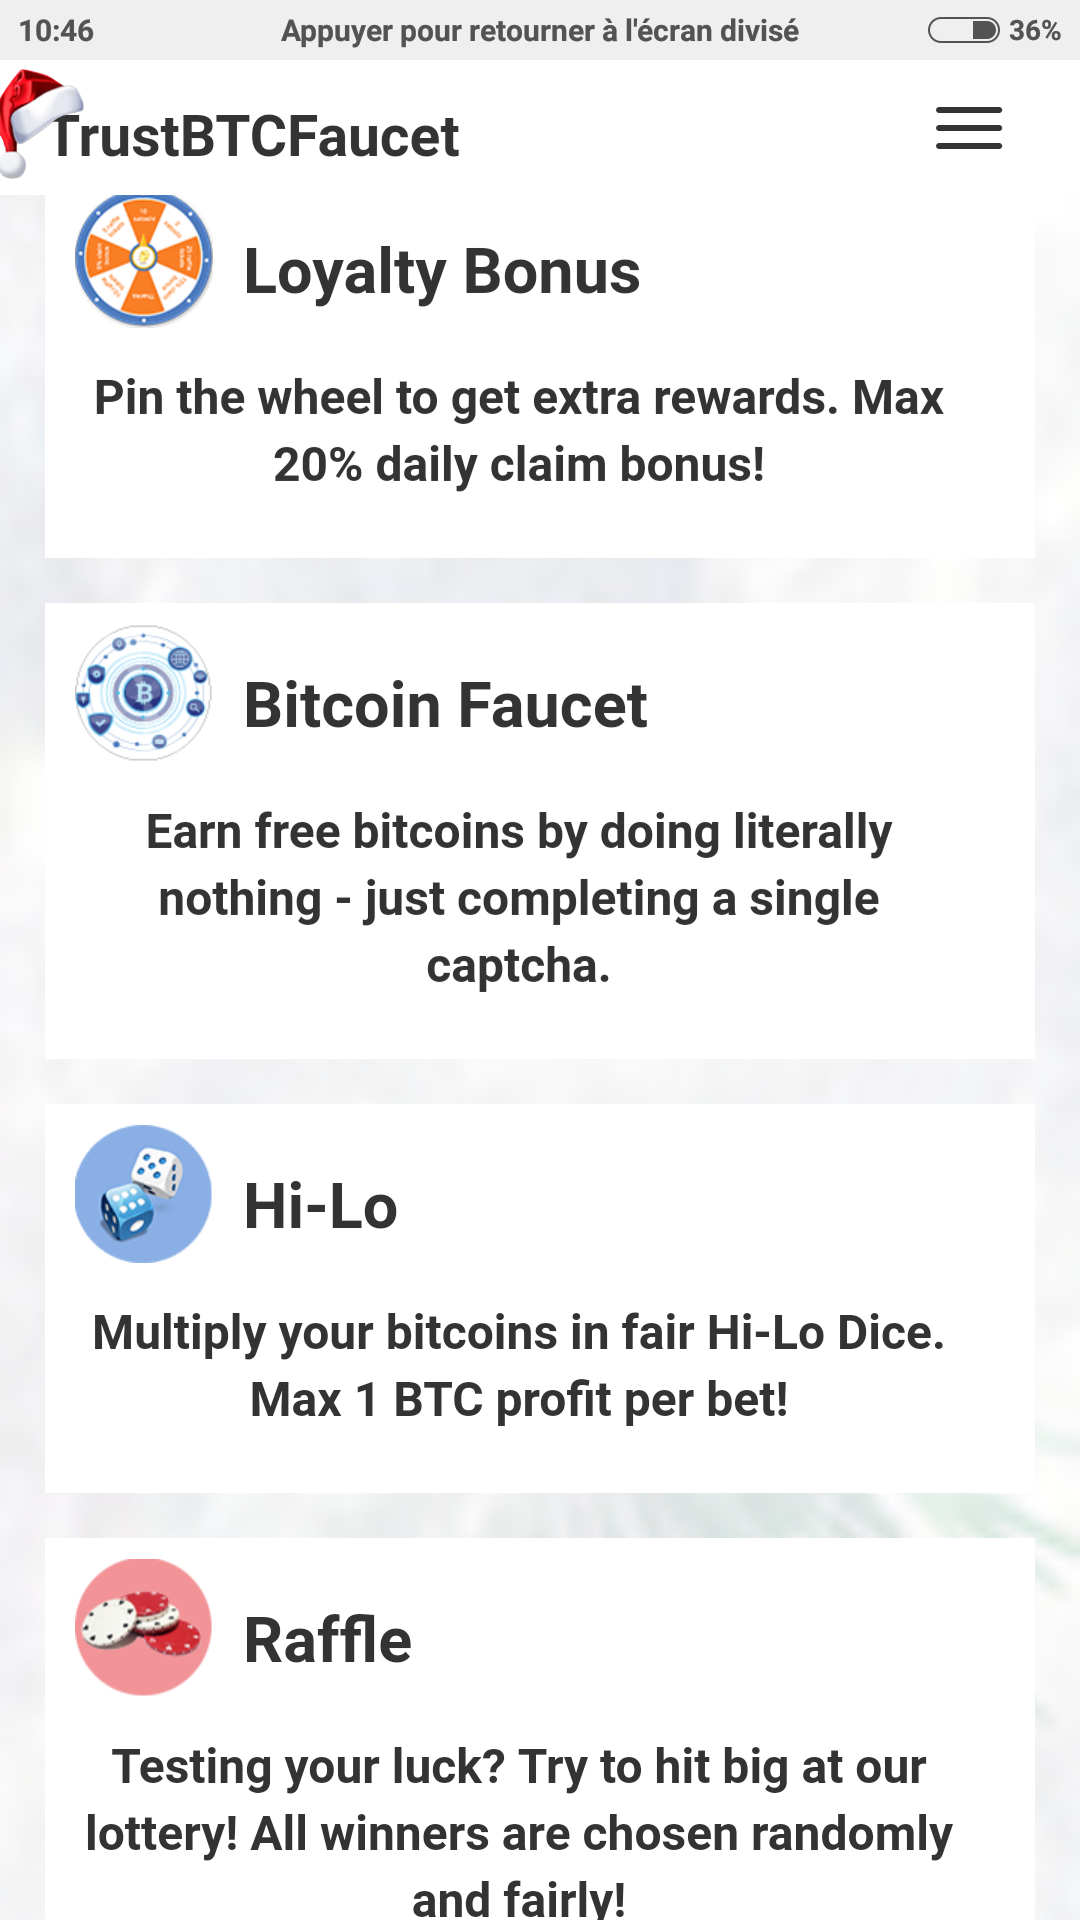 Free bitcoin faucet every 5 minutes